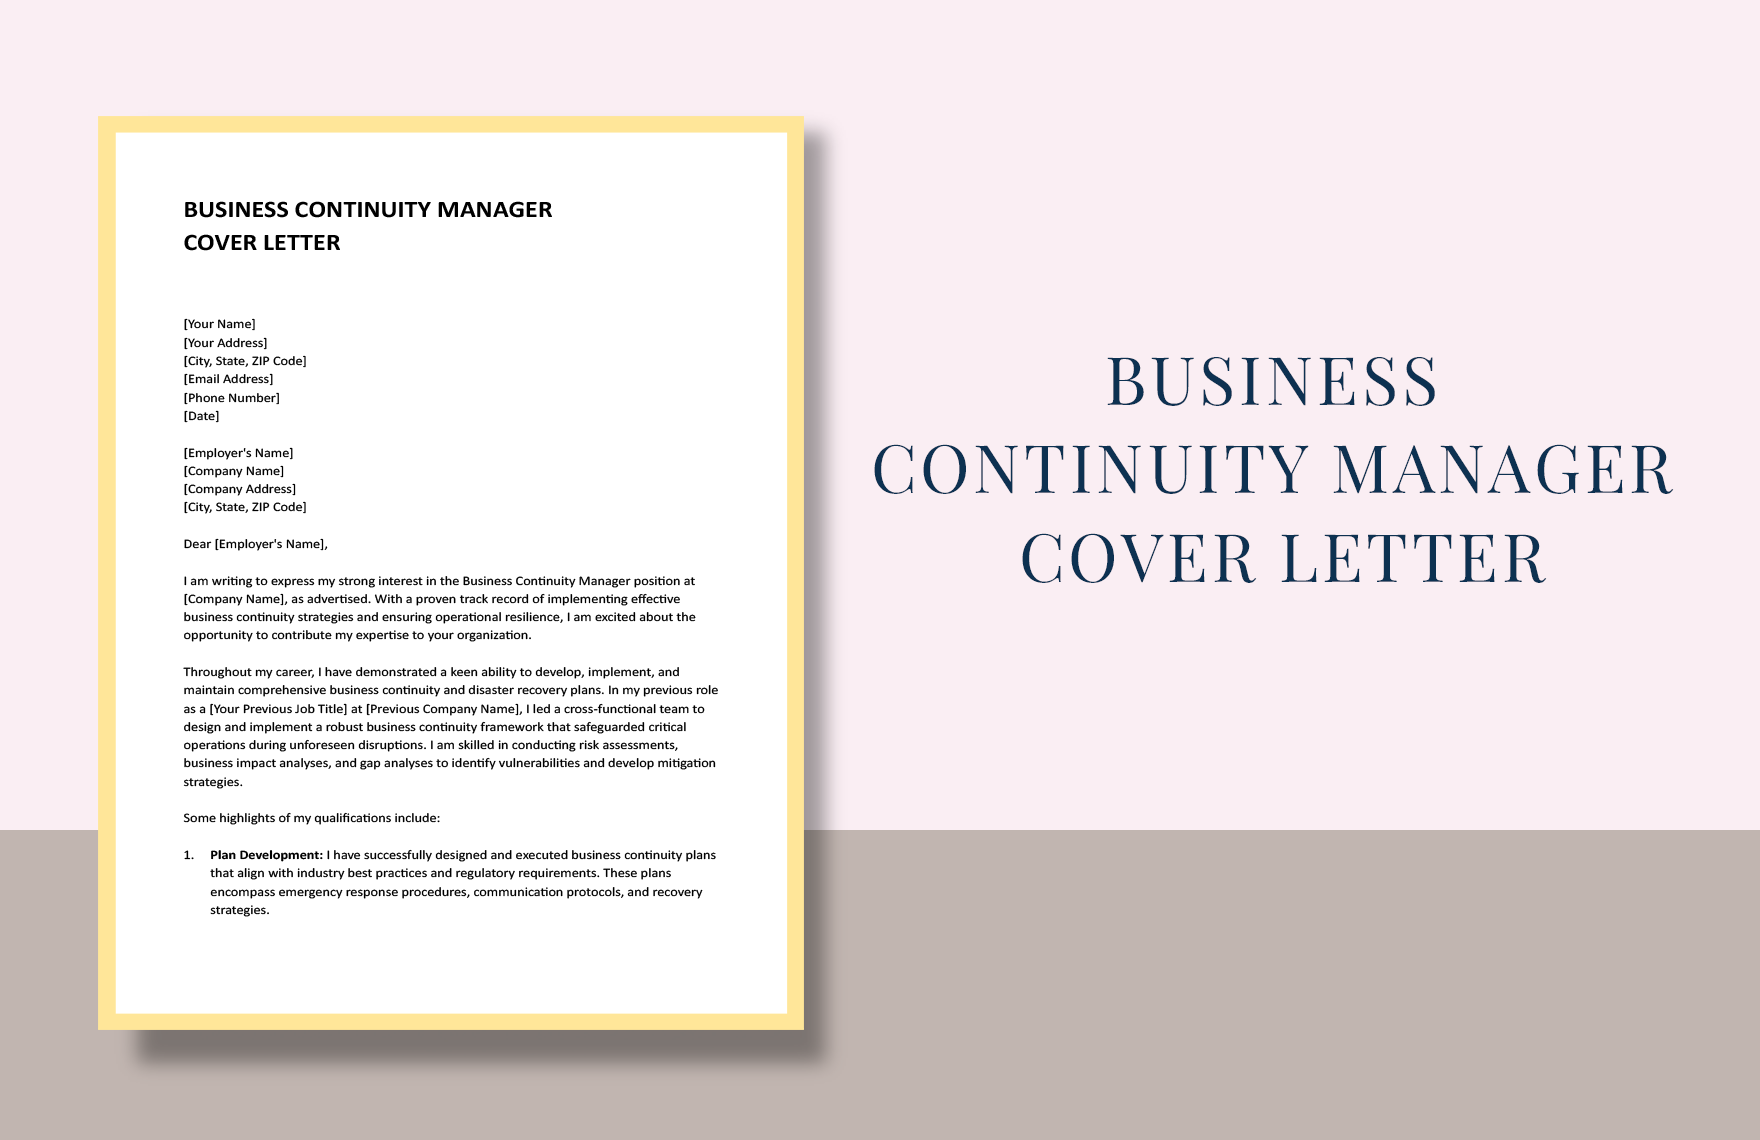 Free Business Continuity Manager Cover Letter in Word, Google Docs, Apple Pages